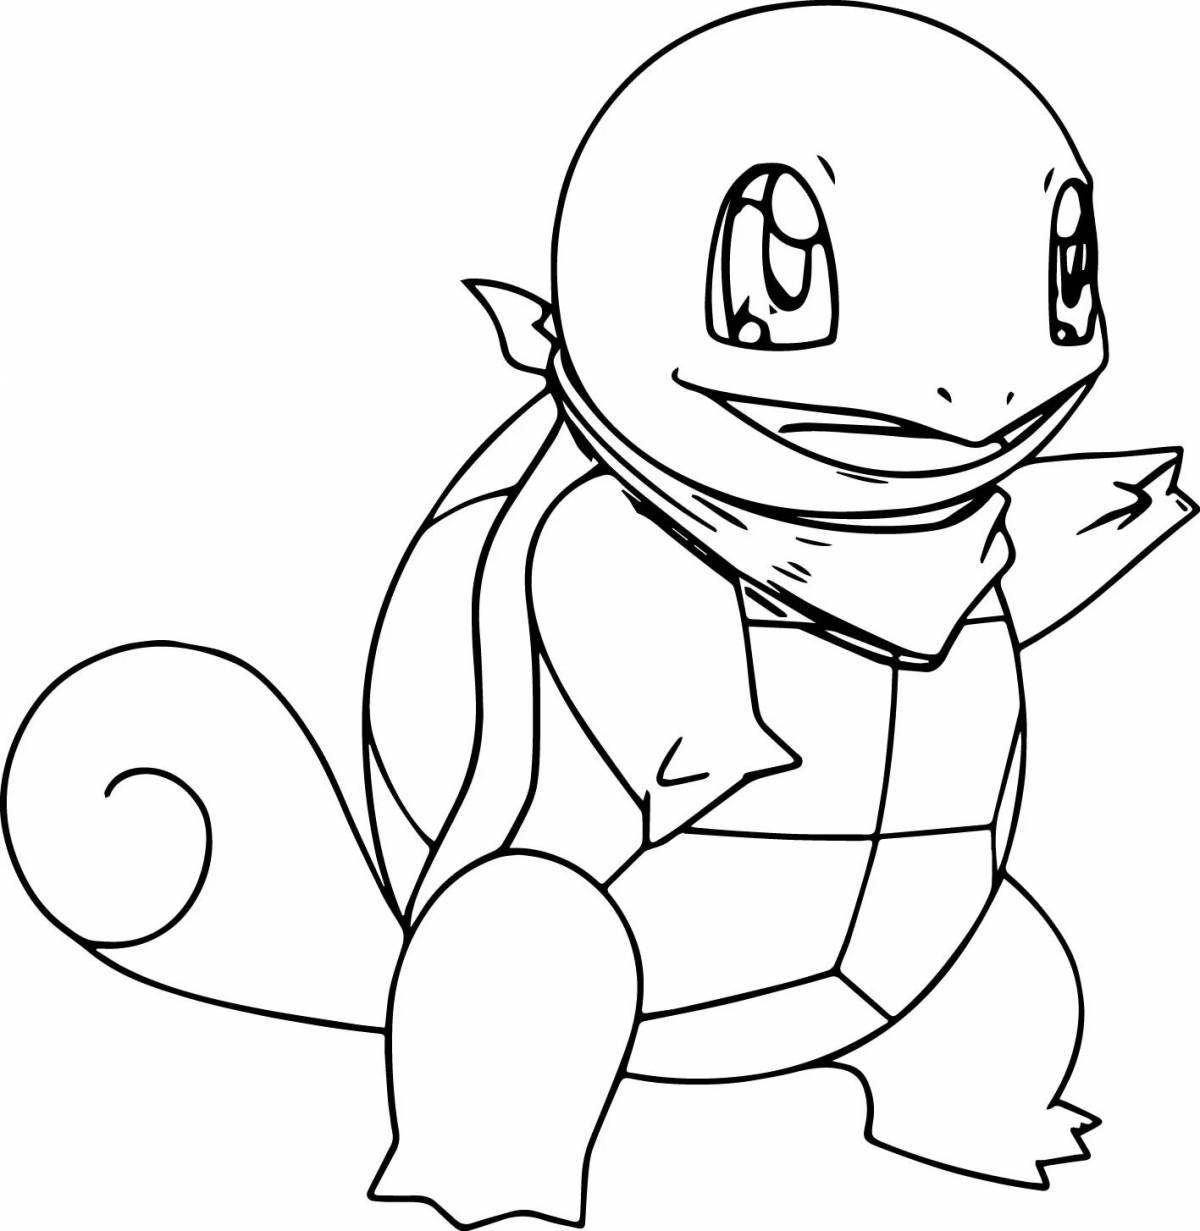 Charming squirtle pokemon coloring book